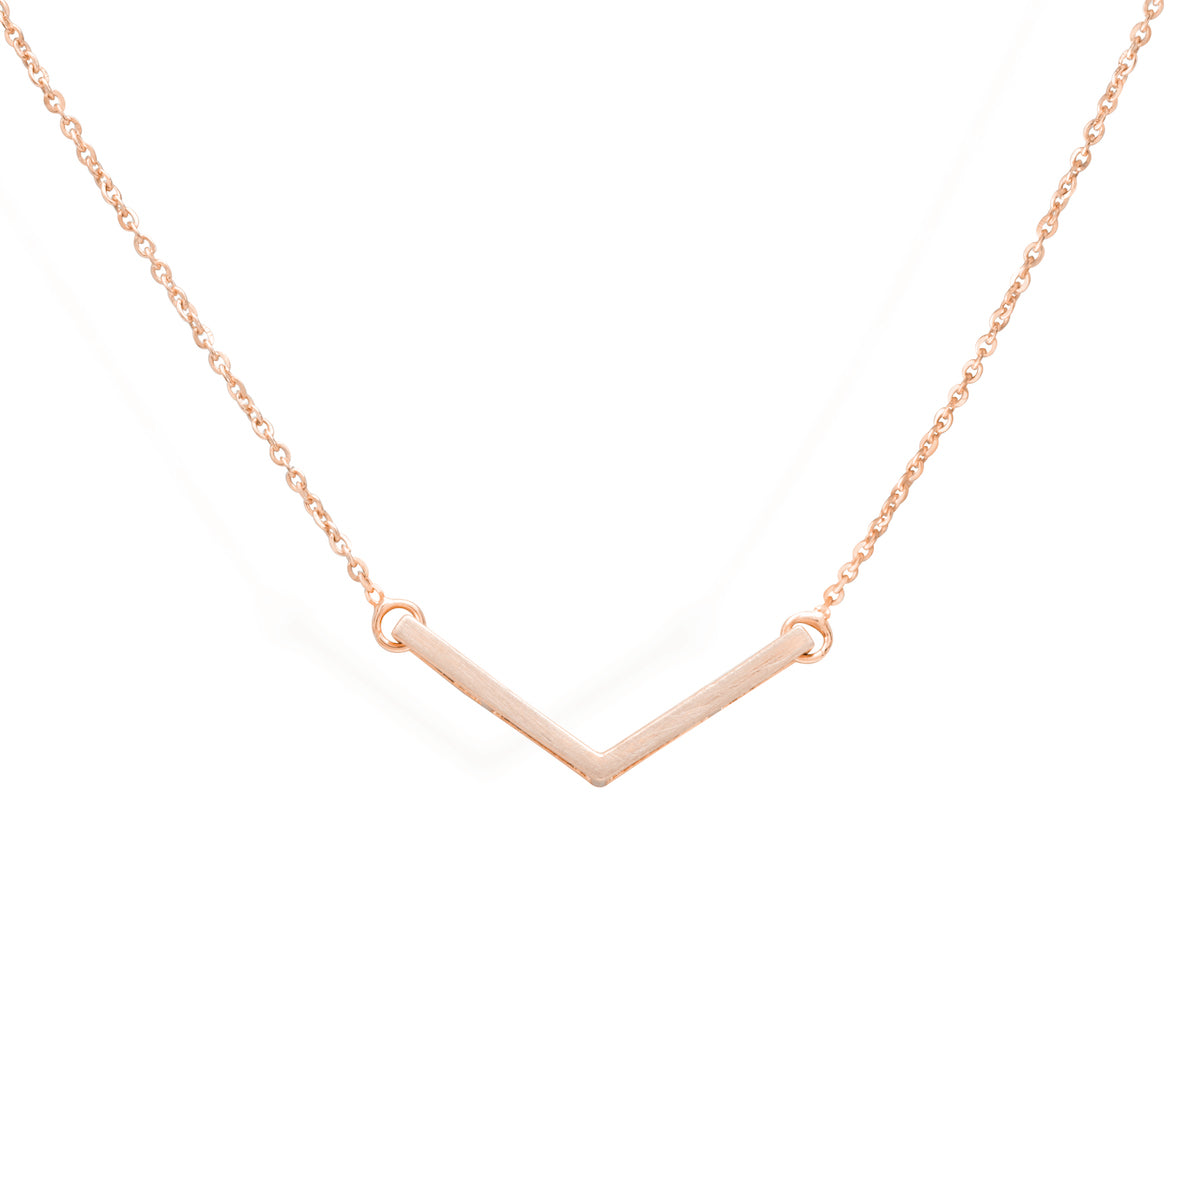 Gold necklace for women in rose gold colour 